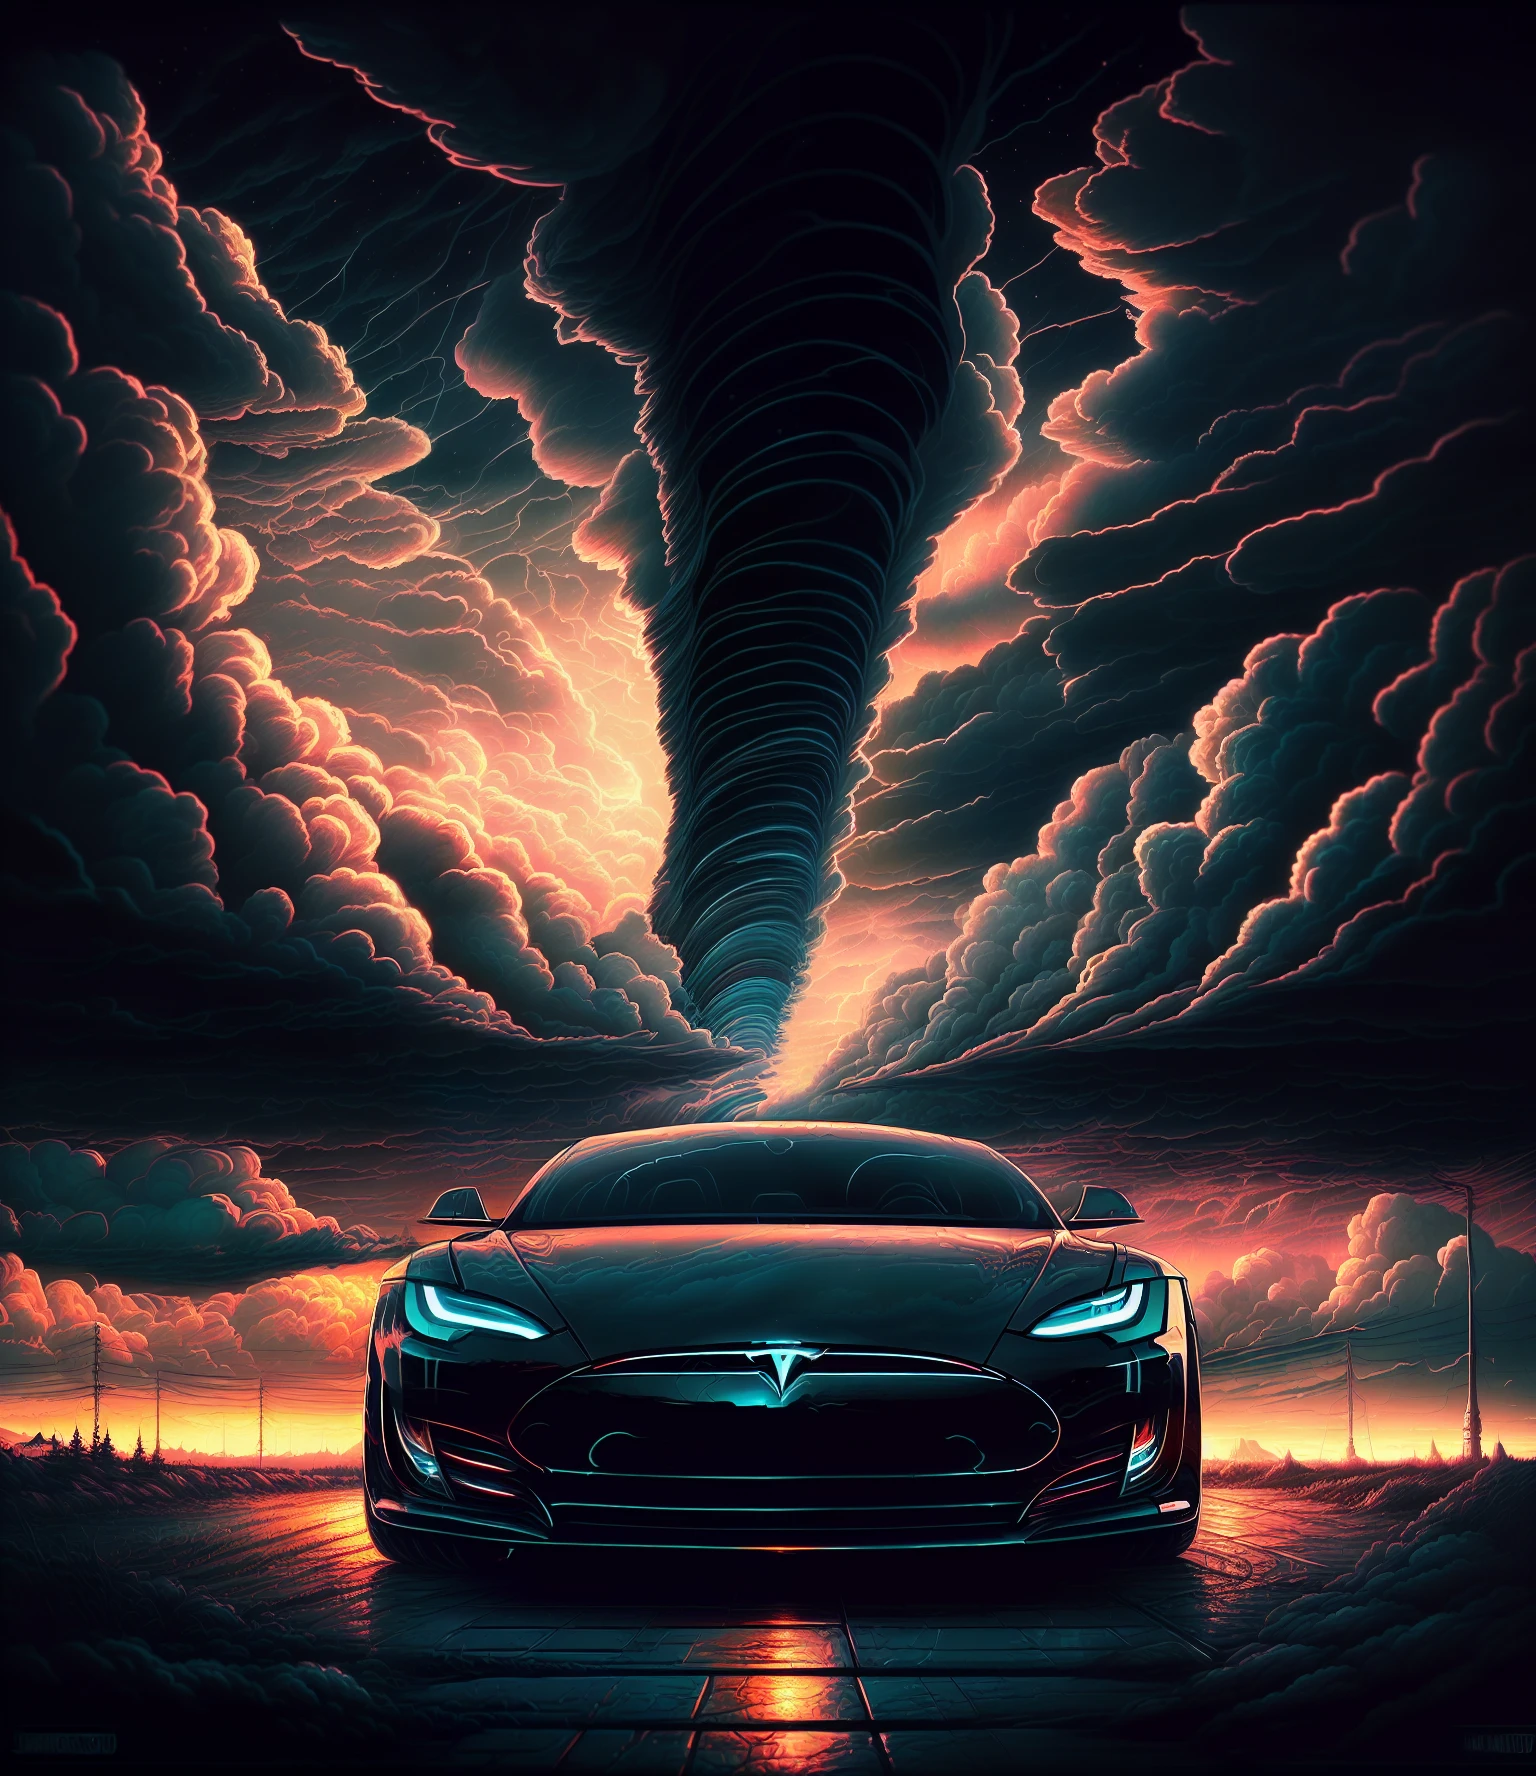 (abstract:1.2) front view (the tesla car, beautiful clouds, night:1.1) portrait, artistic sharp gloomy art, (dan mumford style:1.3), hdr, realism, cinematic atmosphere, lovecraft style, (JimJorCrafLogo art style:1.4). 